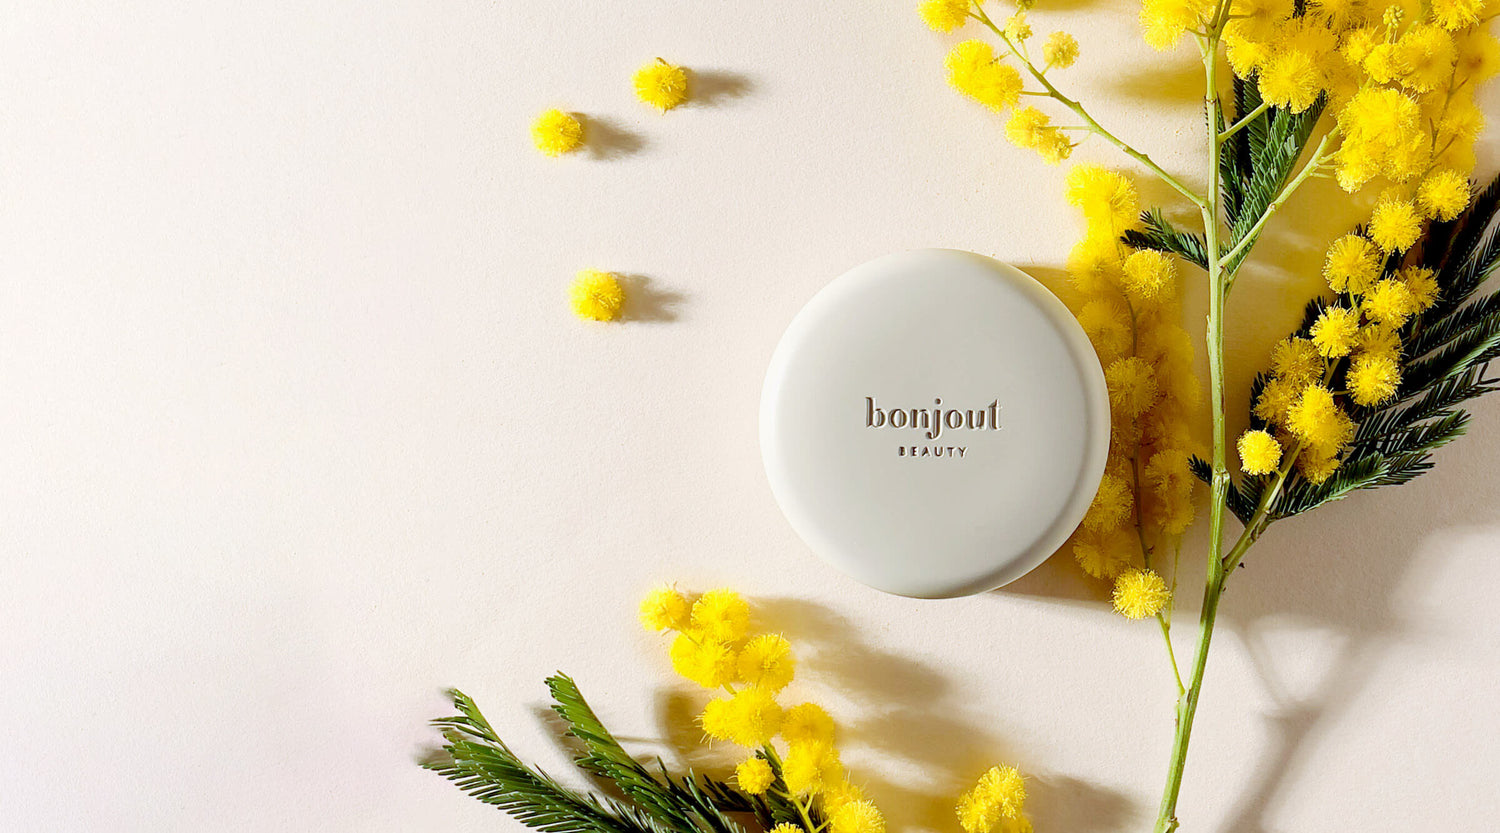 Bonjout Beauty's Le Balm product with yellow flowers on neutral background